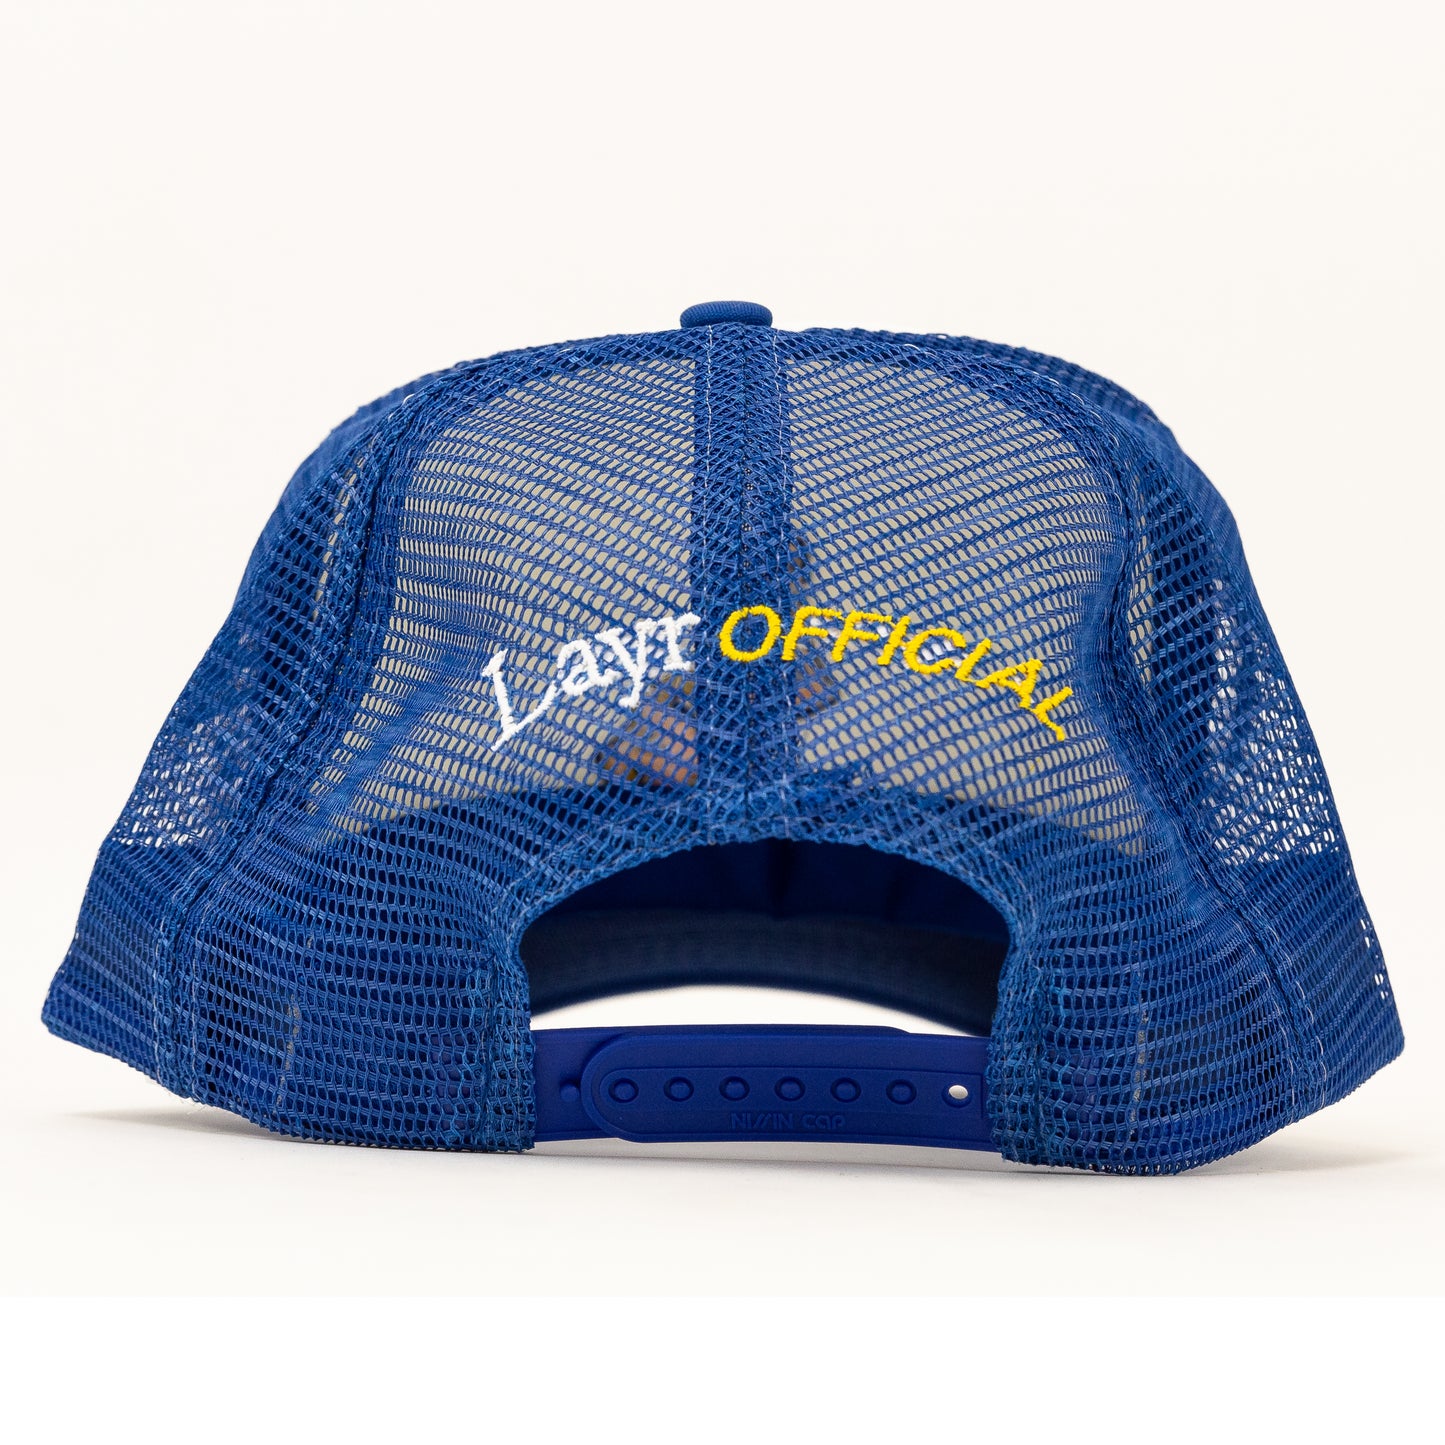 New LO Duck Trucker Hat, Royal - Layr Official